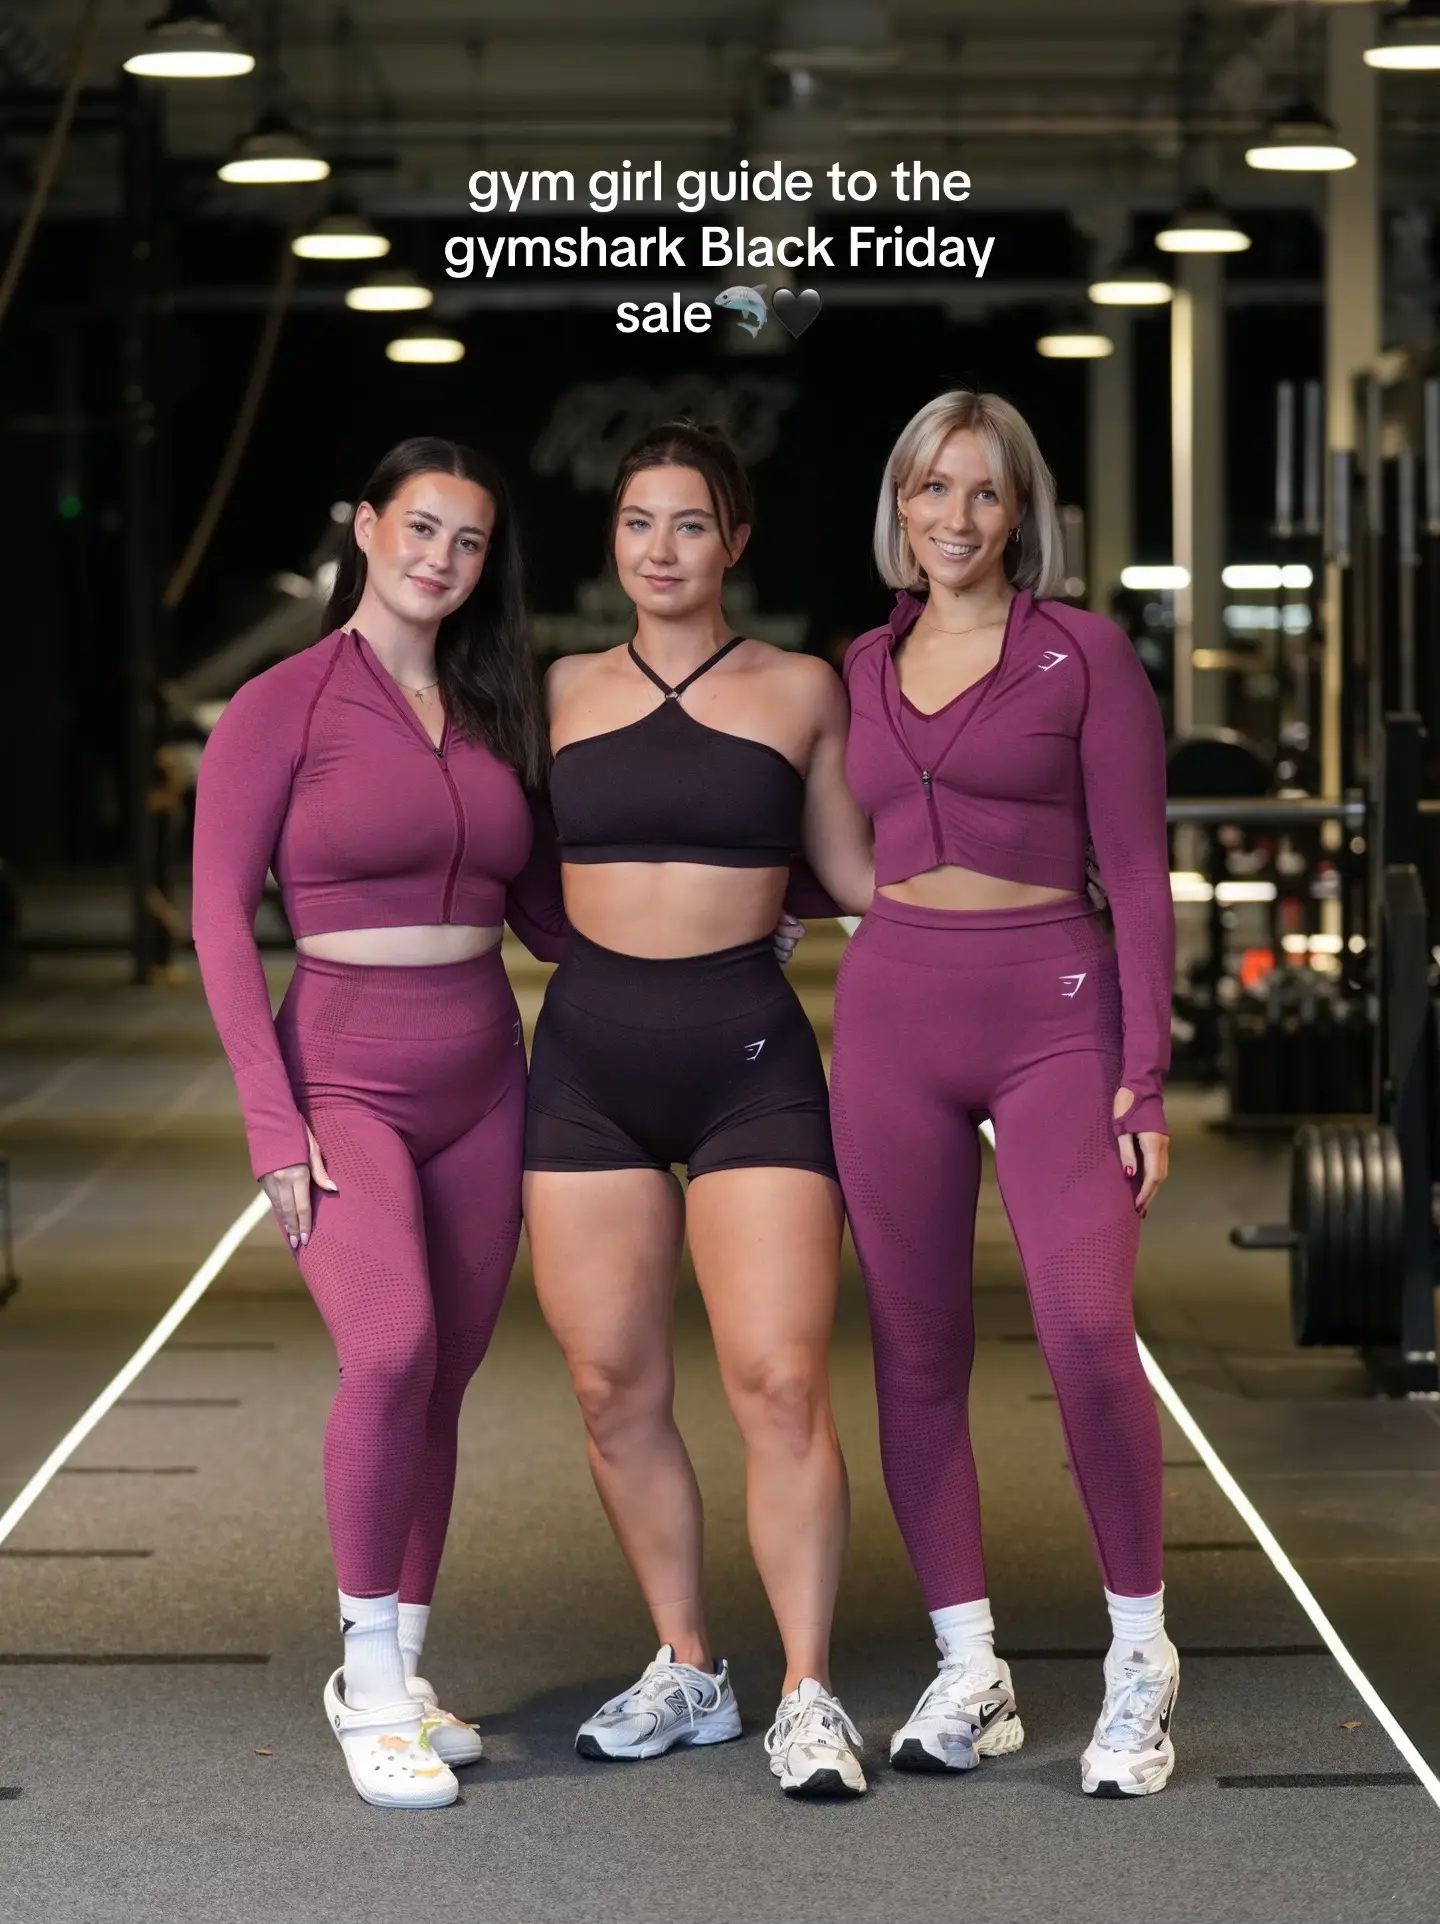 gym girl Gymshark sale guide🦈  Gallery posted by anongymgirl